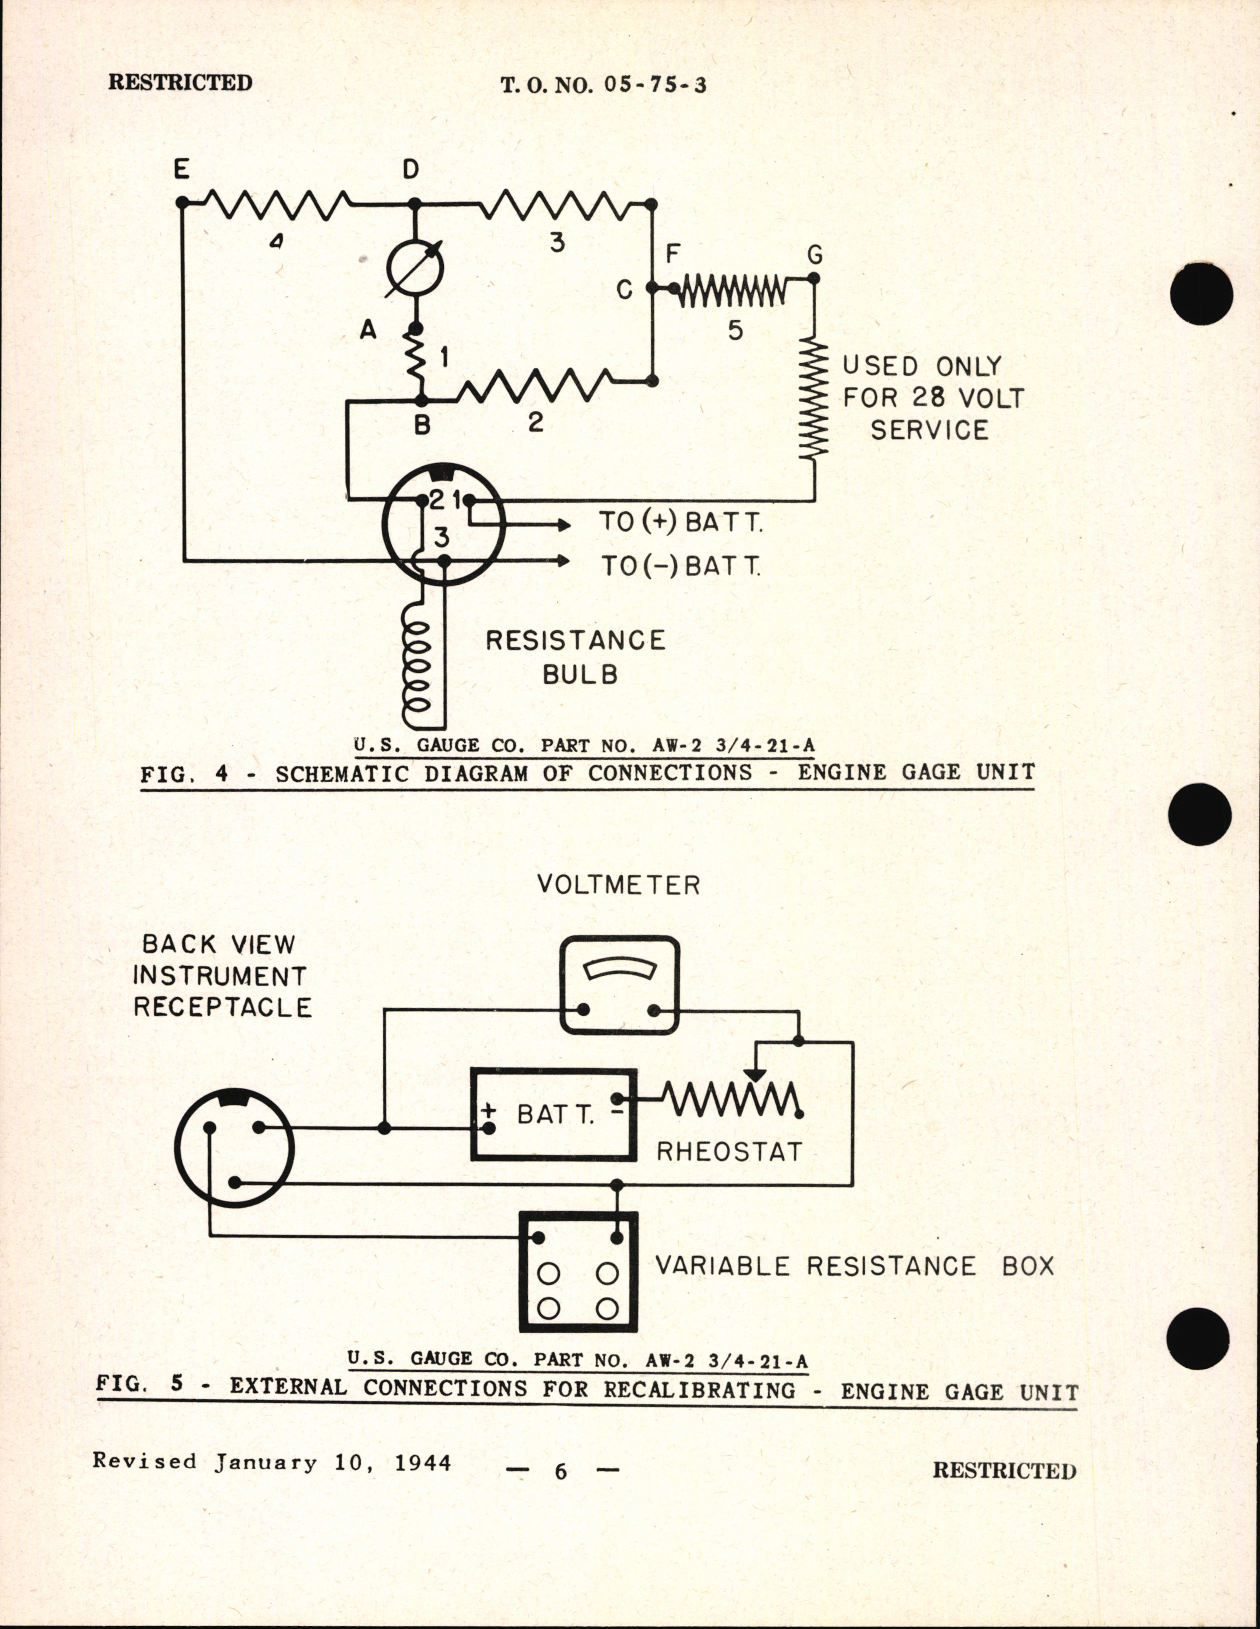 Sample page 8 from AirCorps Library document: Handbook of Instructions with Parts Catalog for Engine Gage Units